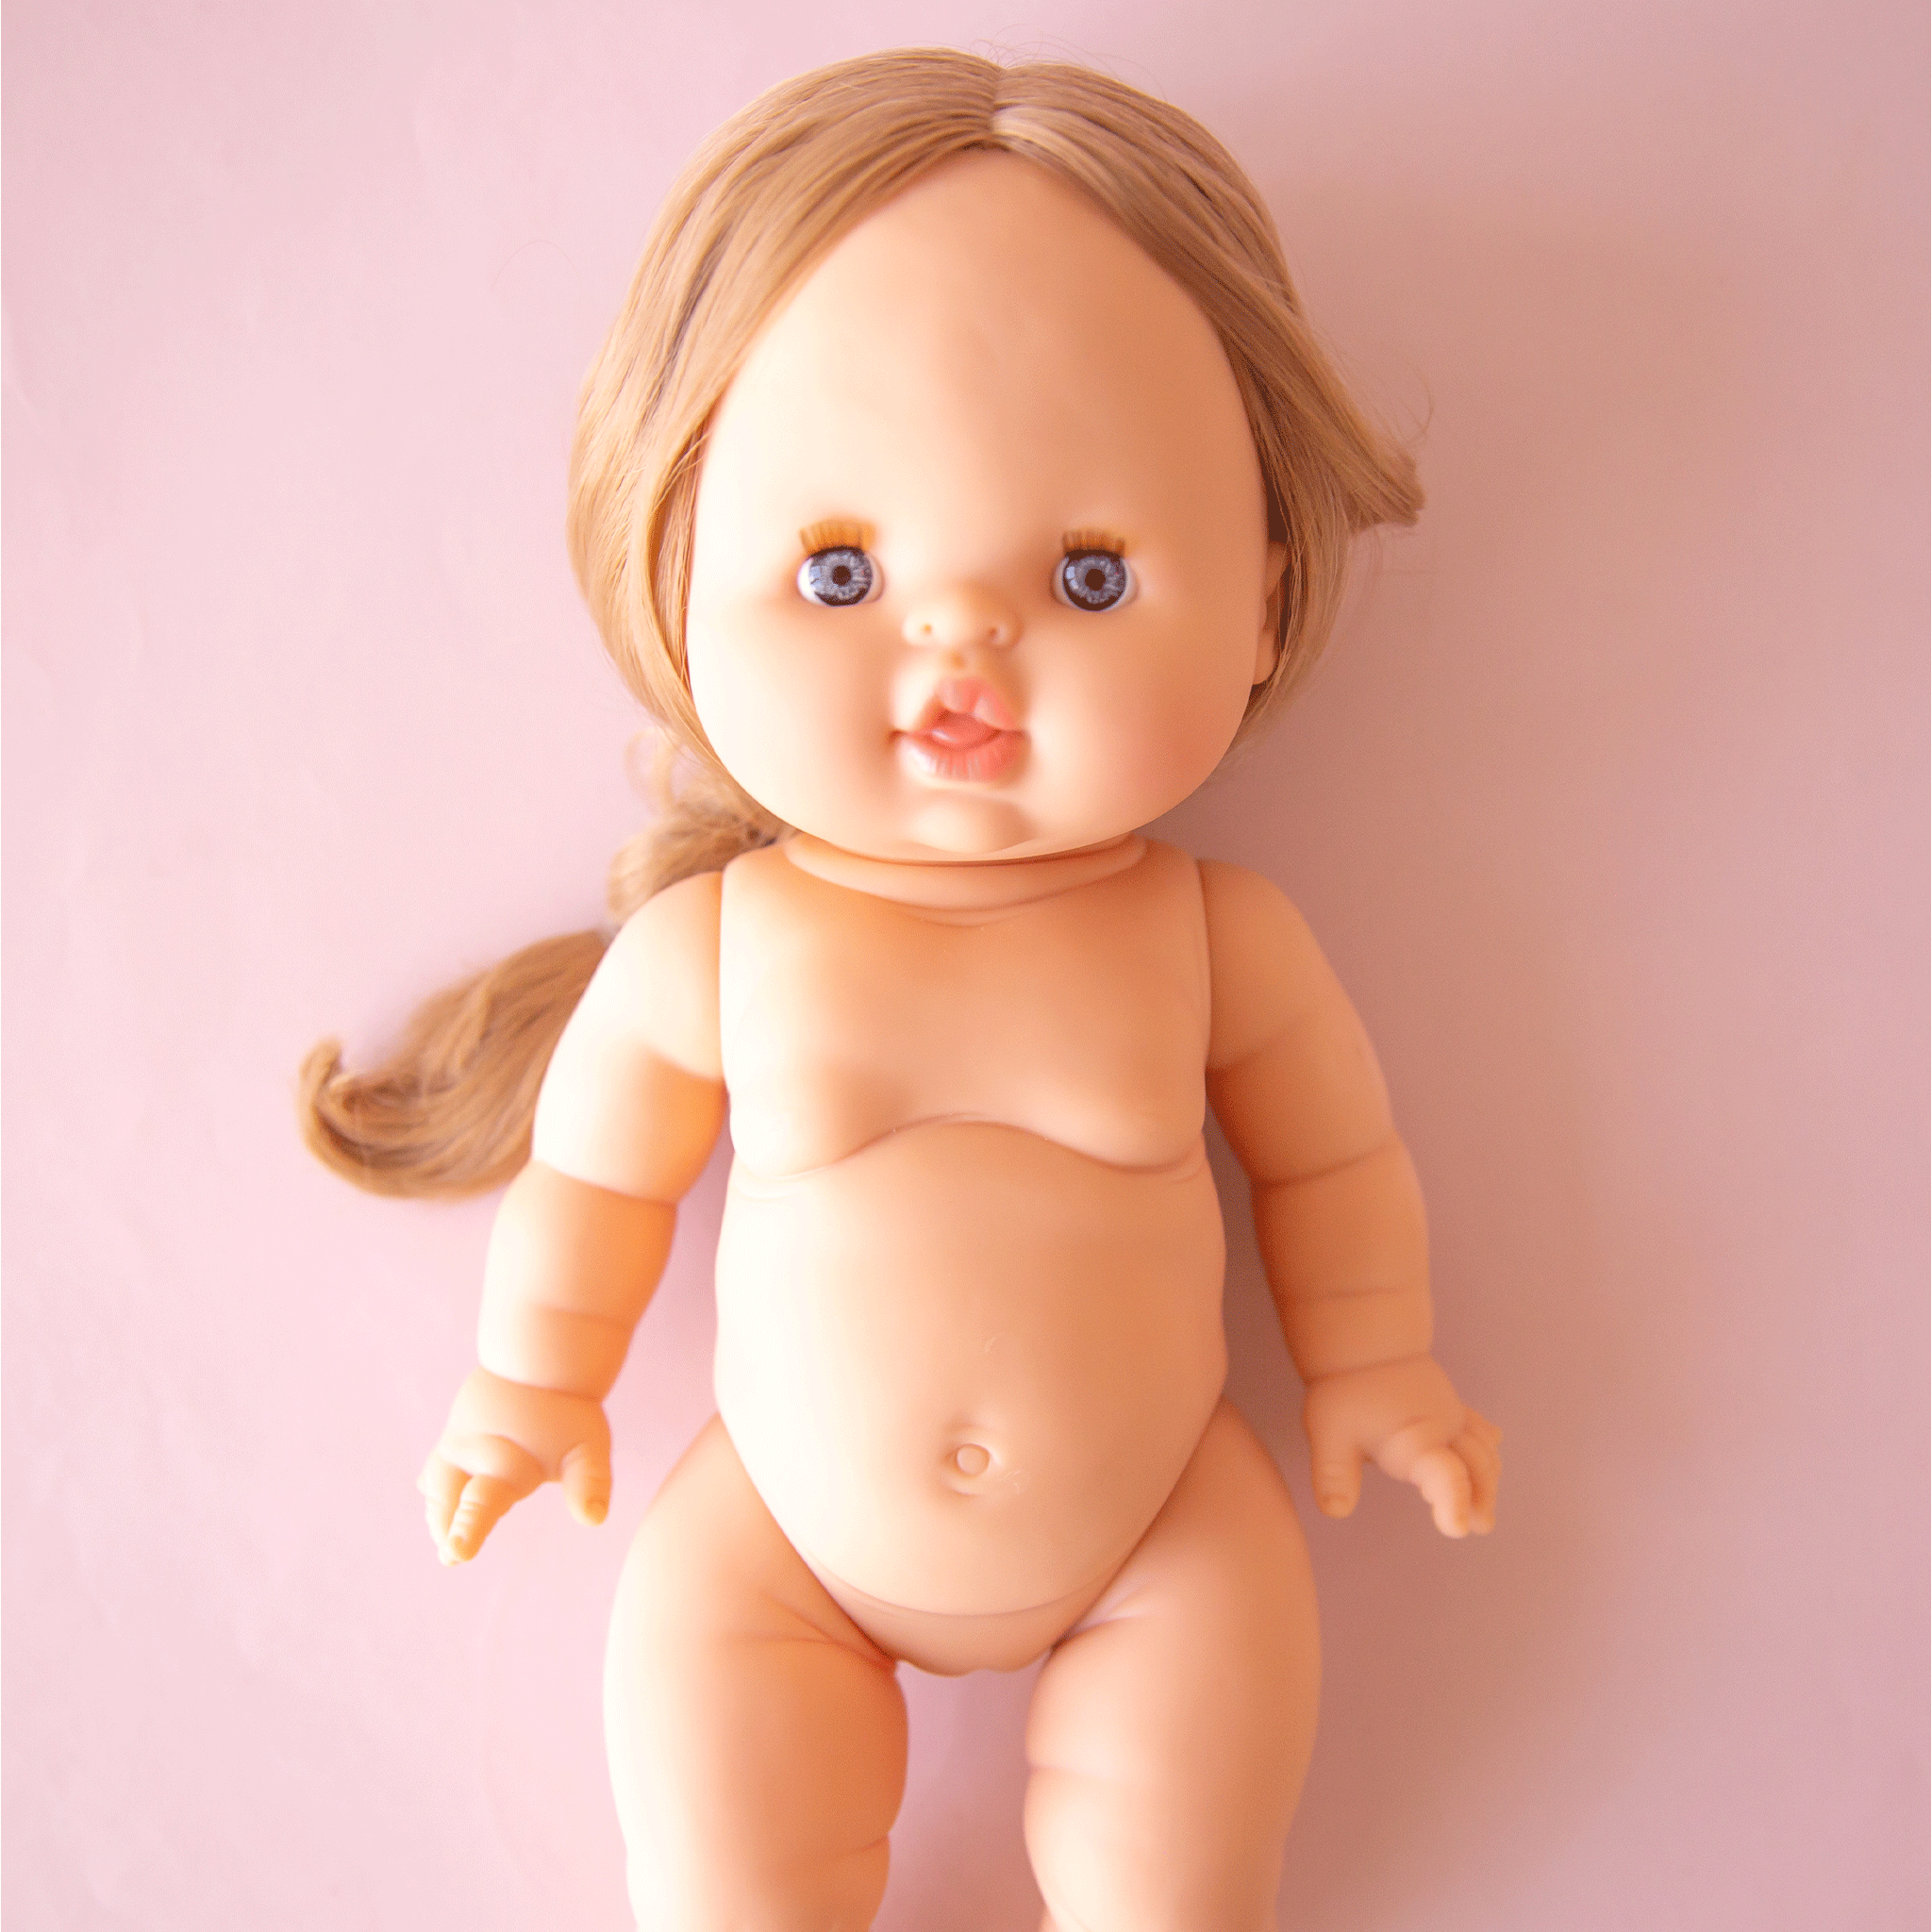 On a pink background is a baby doll with blonde braided hair and blue eyes. 